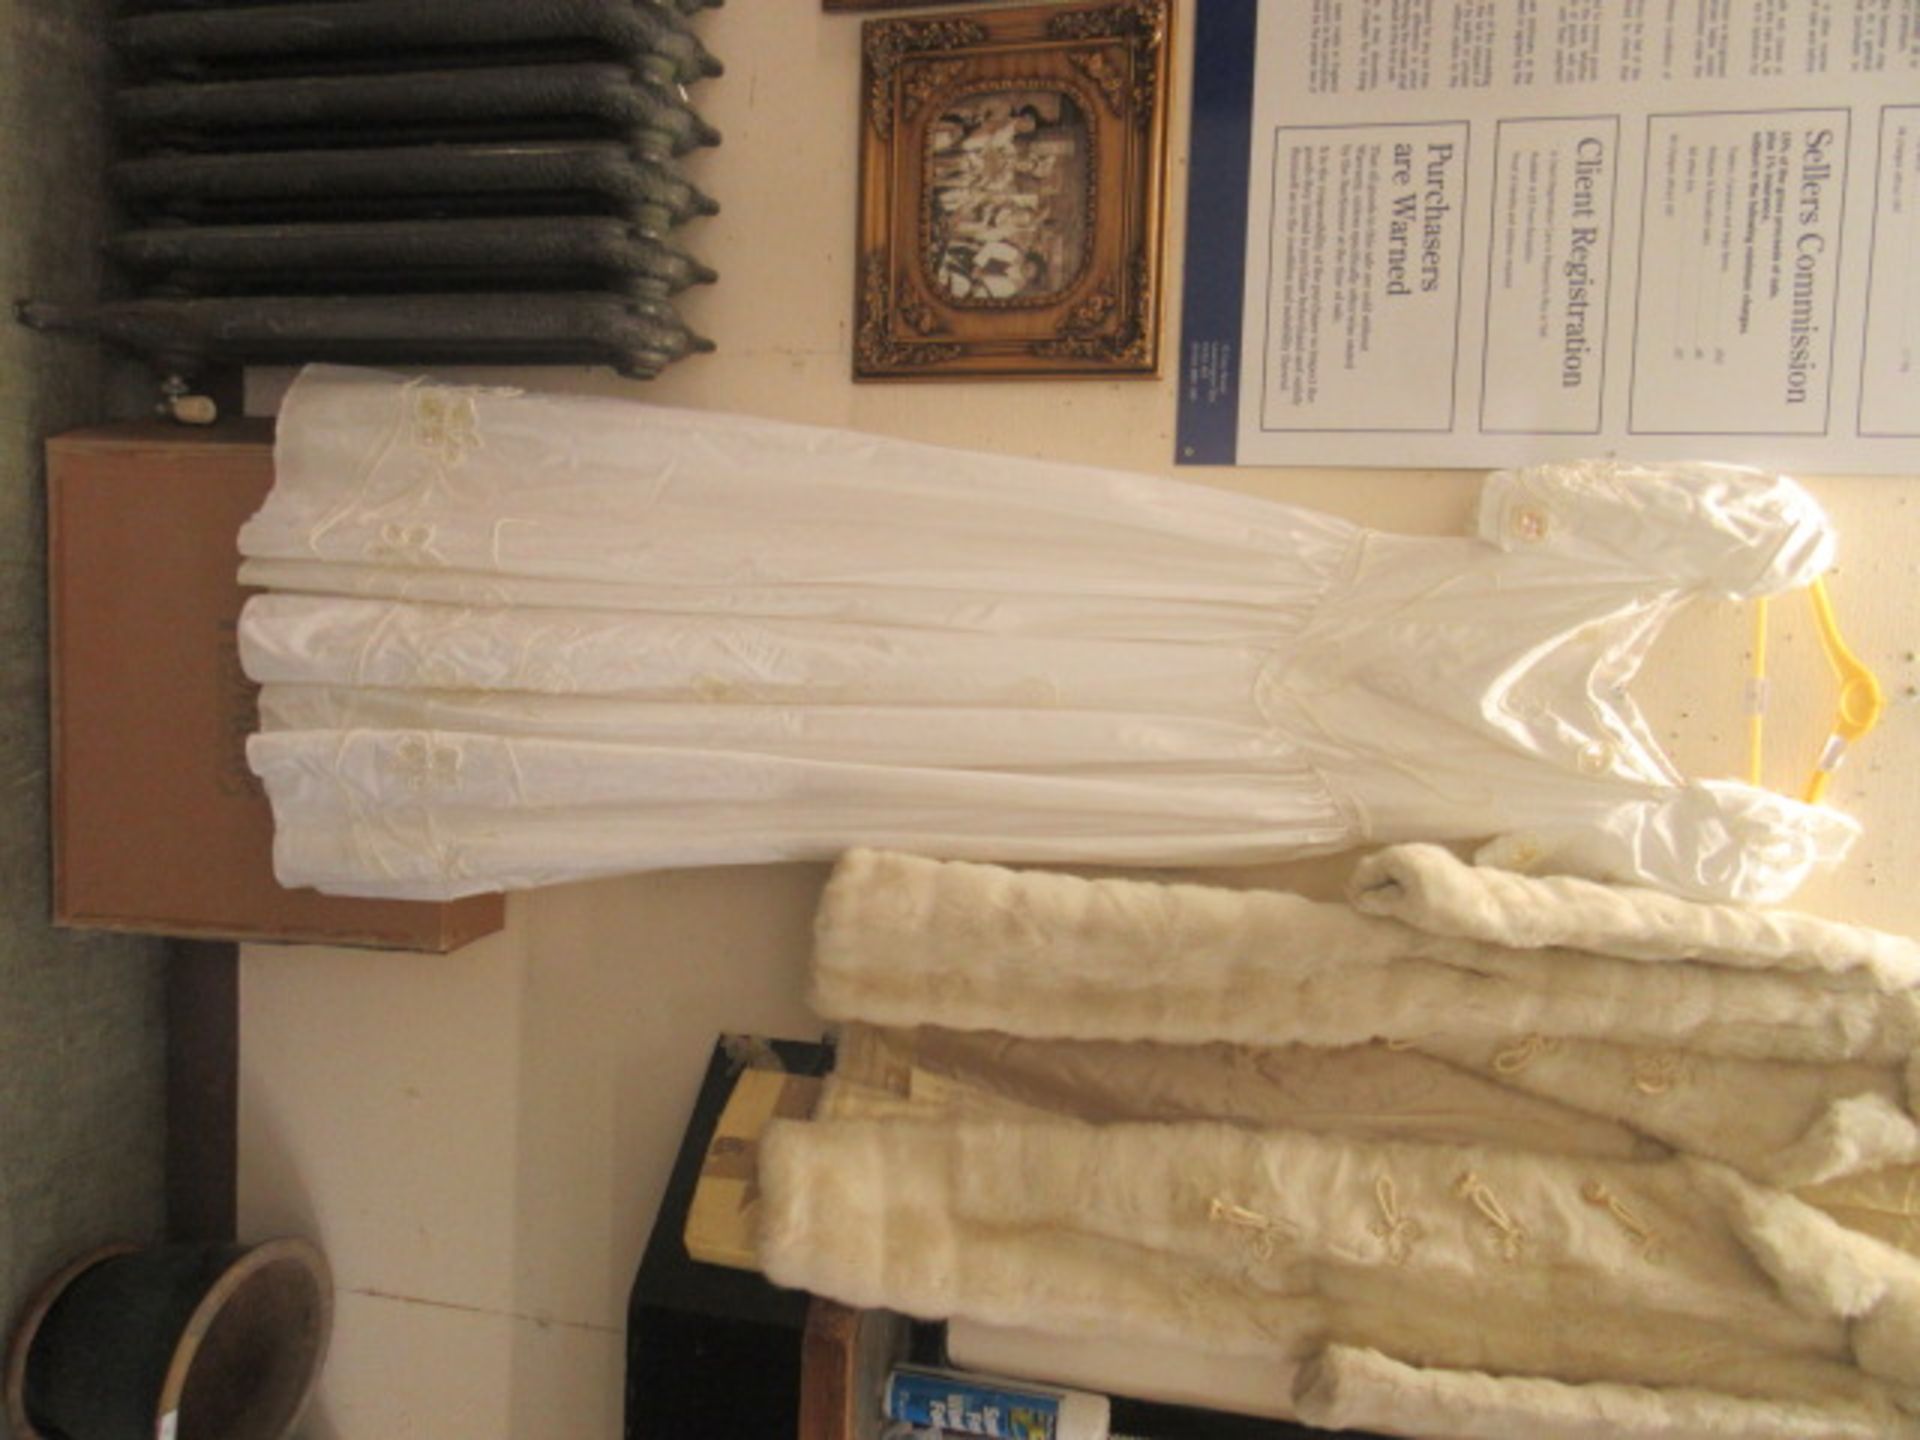 A wedding dress purportedly from Harrods